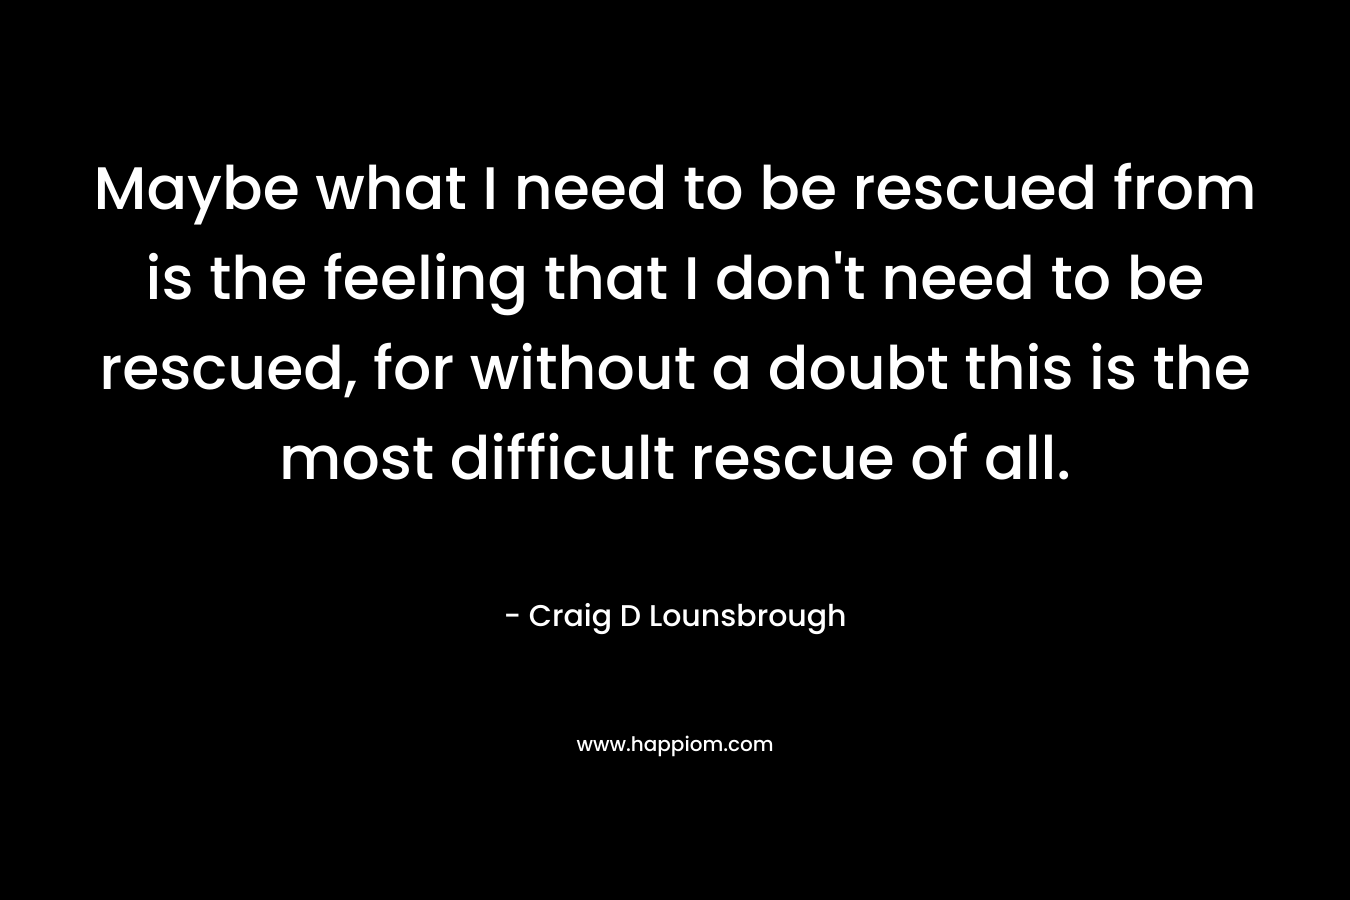 Maybe what I need to be rescued from is the feeling that I don’t need to be rescued, for without a doubt this is the most difficult rescue of all. – Craig D Lounsbrough